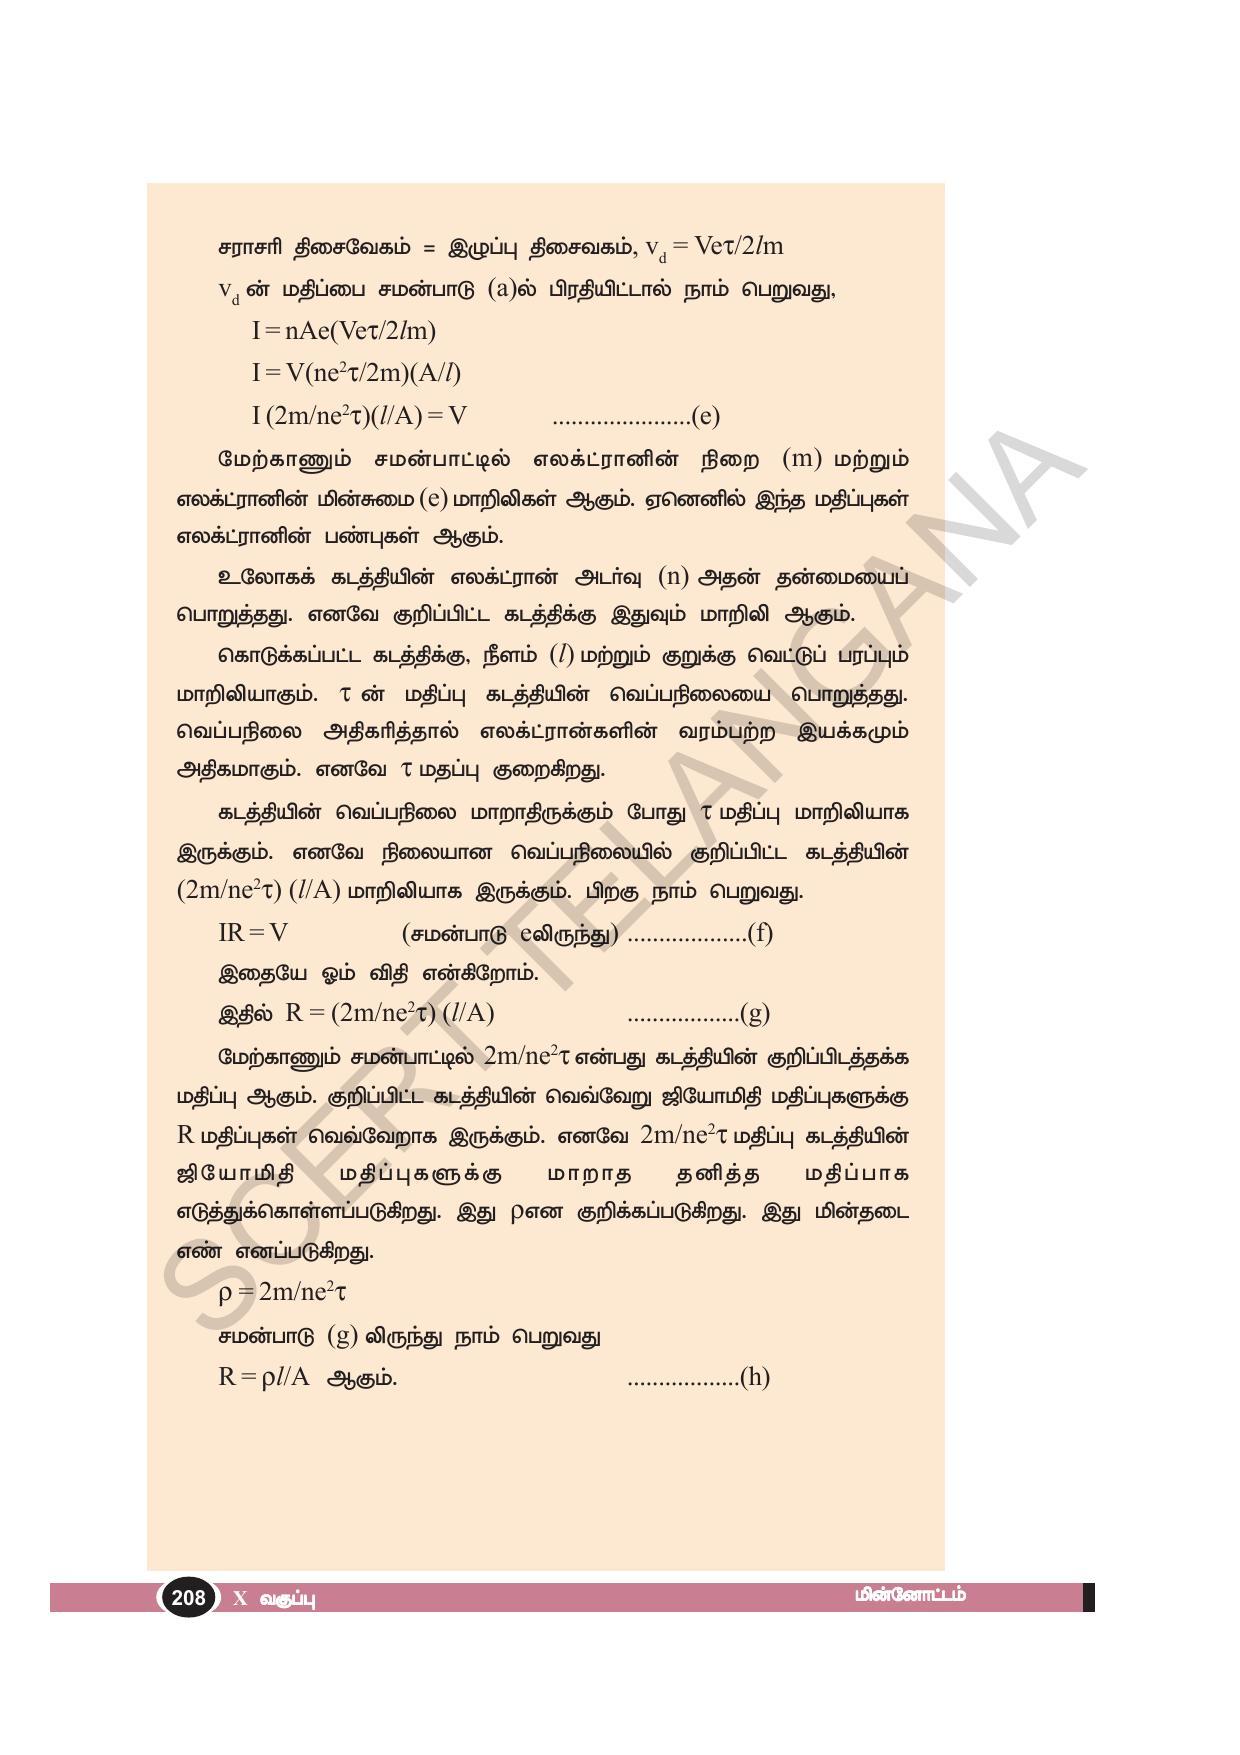 TS SCERT Class 10 Physical Science(Tamil Medium) Text Book - Page 220